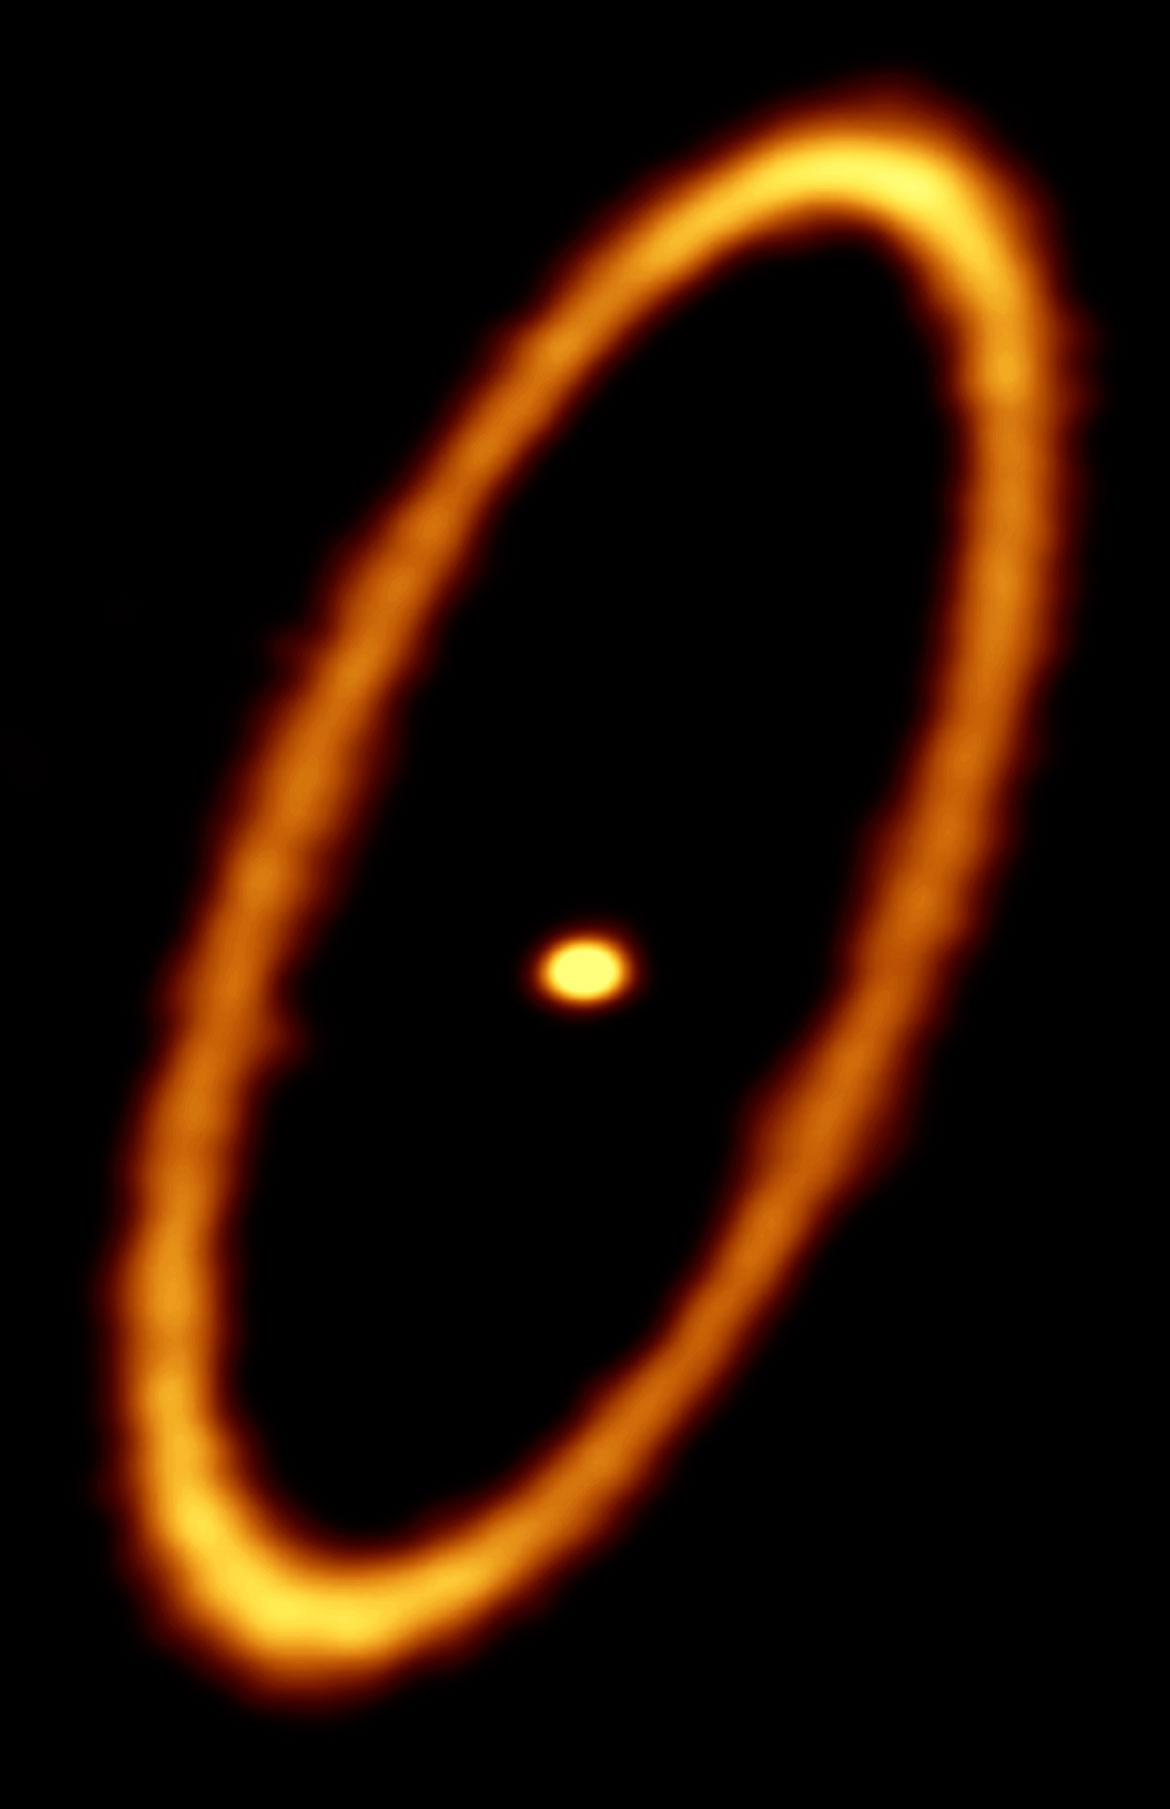 ALMA image of the debris disk in the Fomalhaut star system